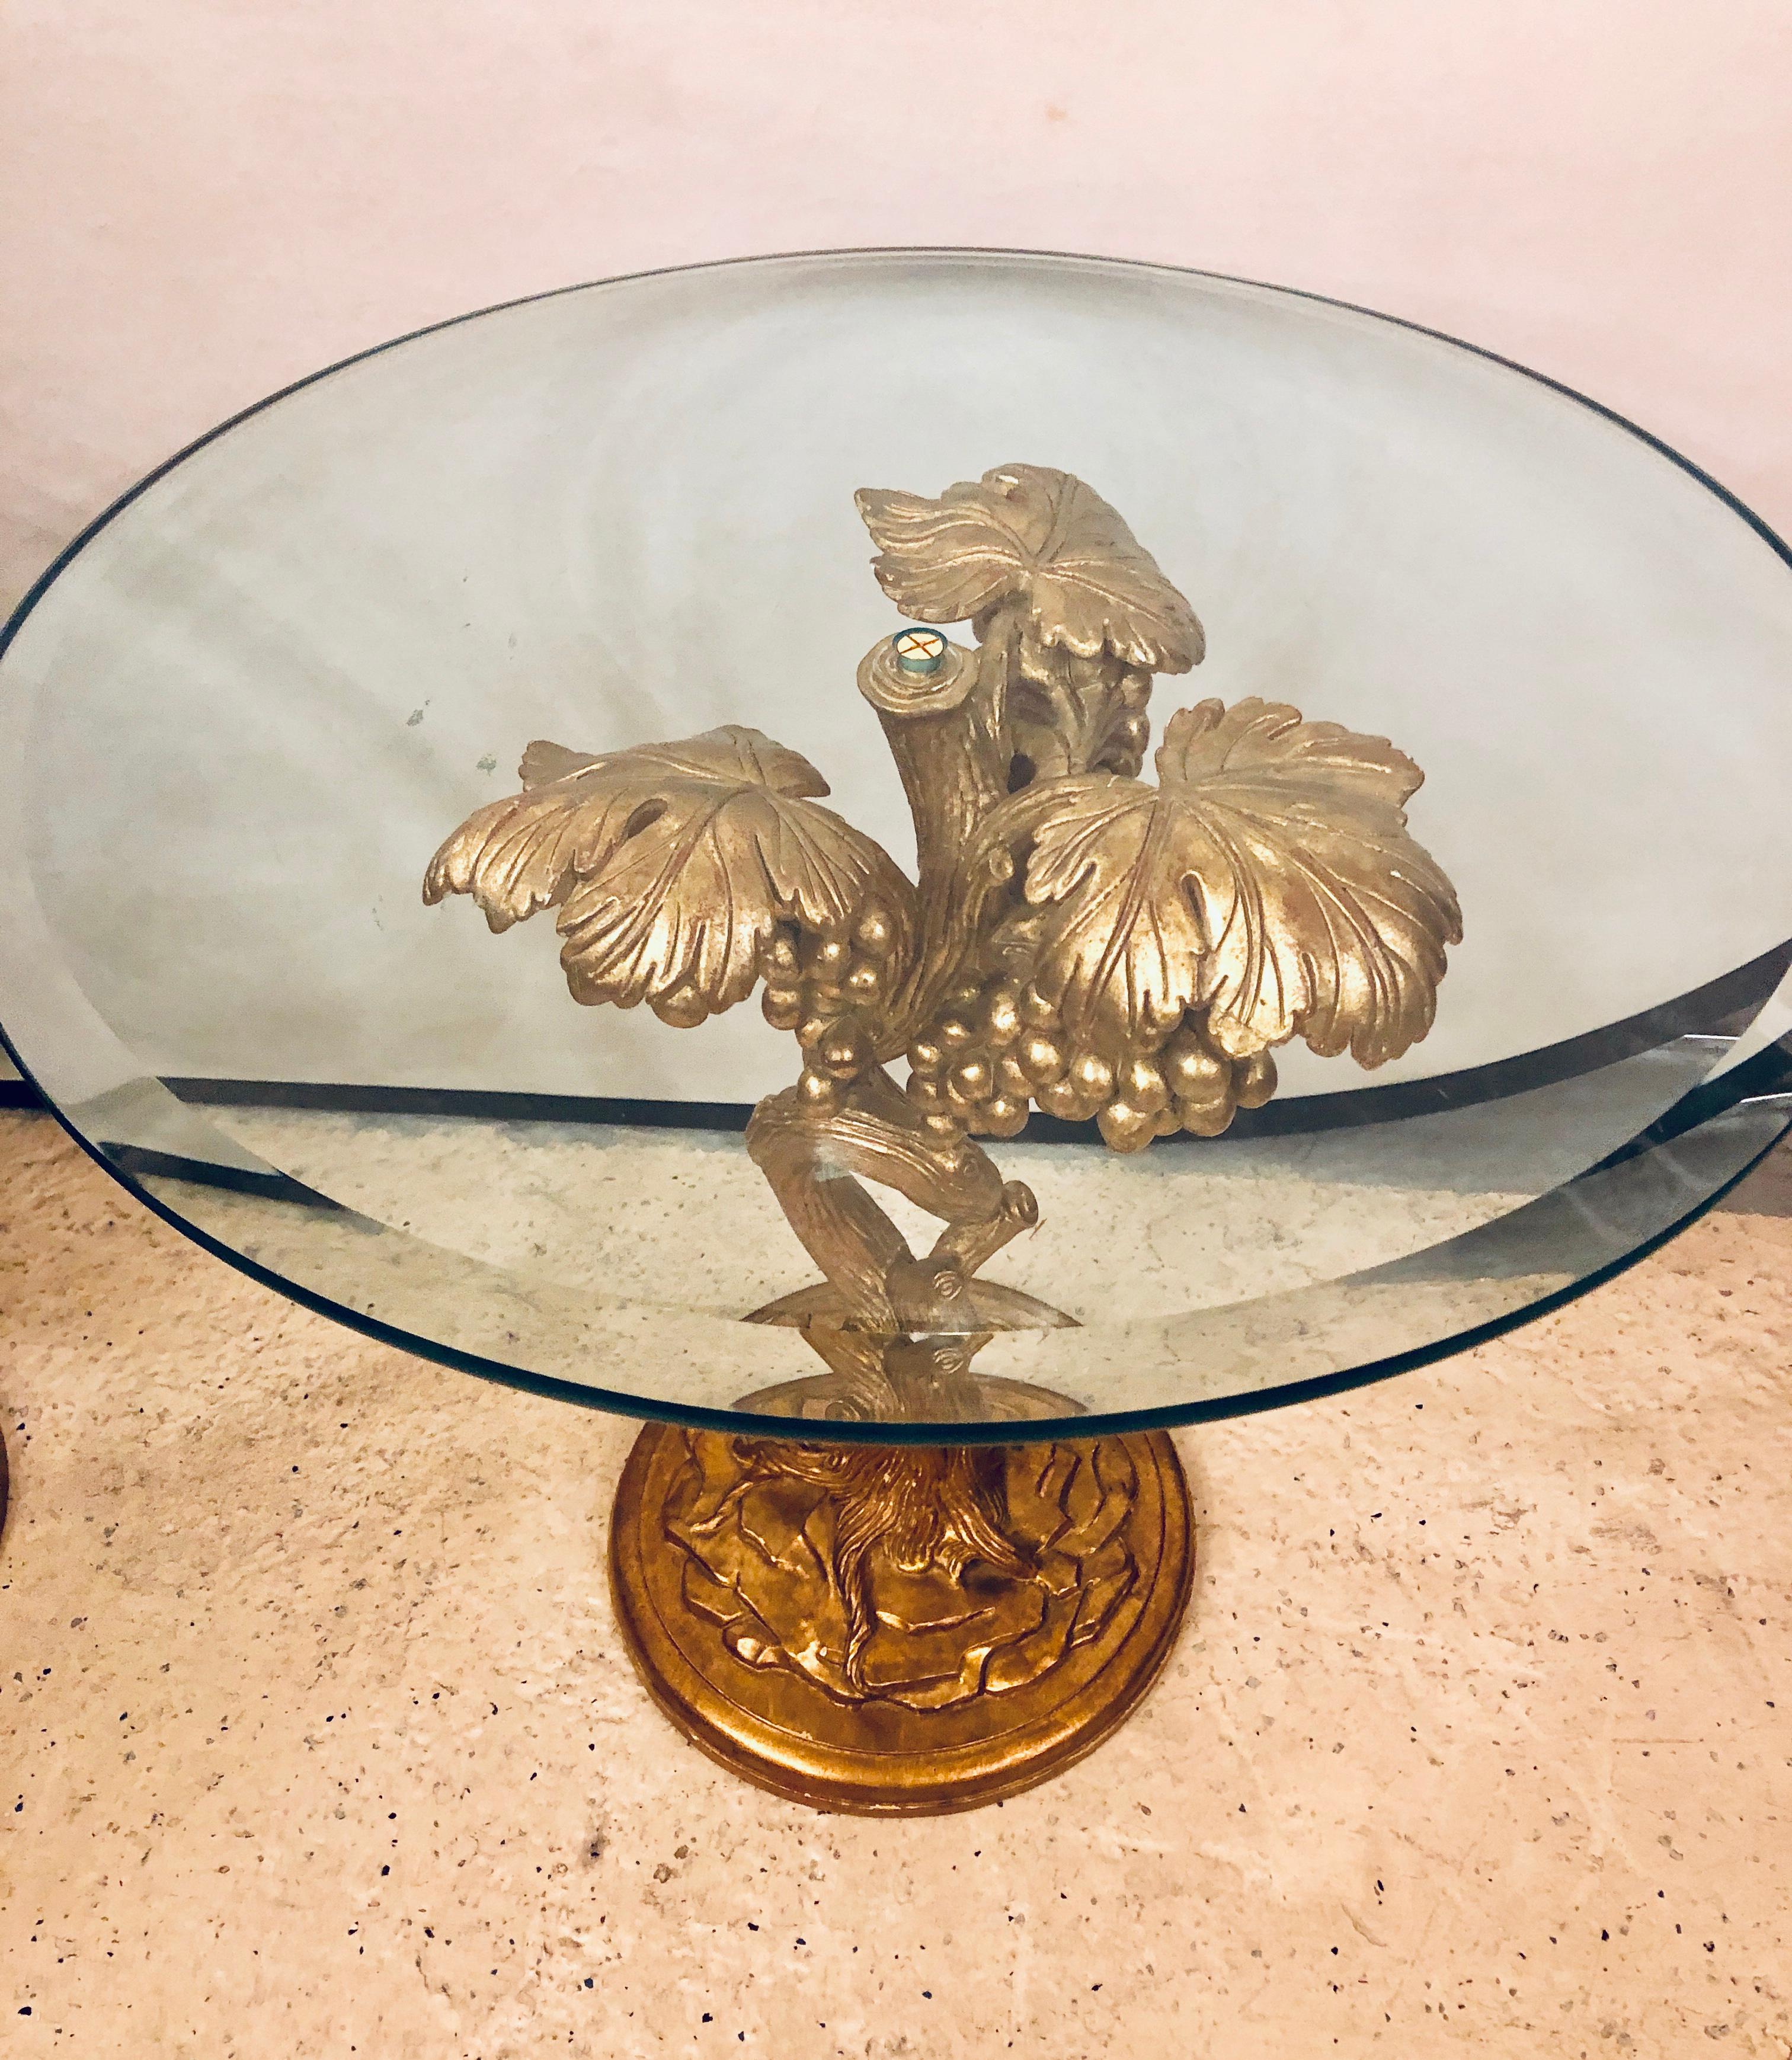 Pair of stylish Italian carved side tables - Grapes on the vine design. These fine and highly decorative side or end table each have a flowing vine with wonderfully detailed grapes hanging from the vine in a gilt gold finish. Each supporting a